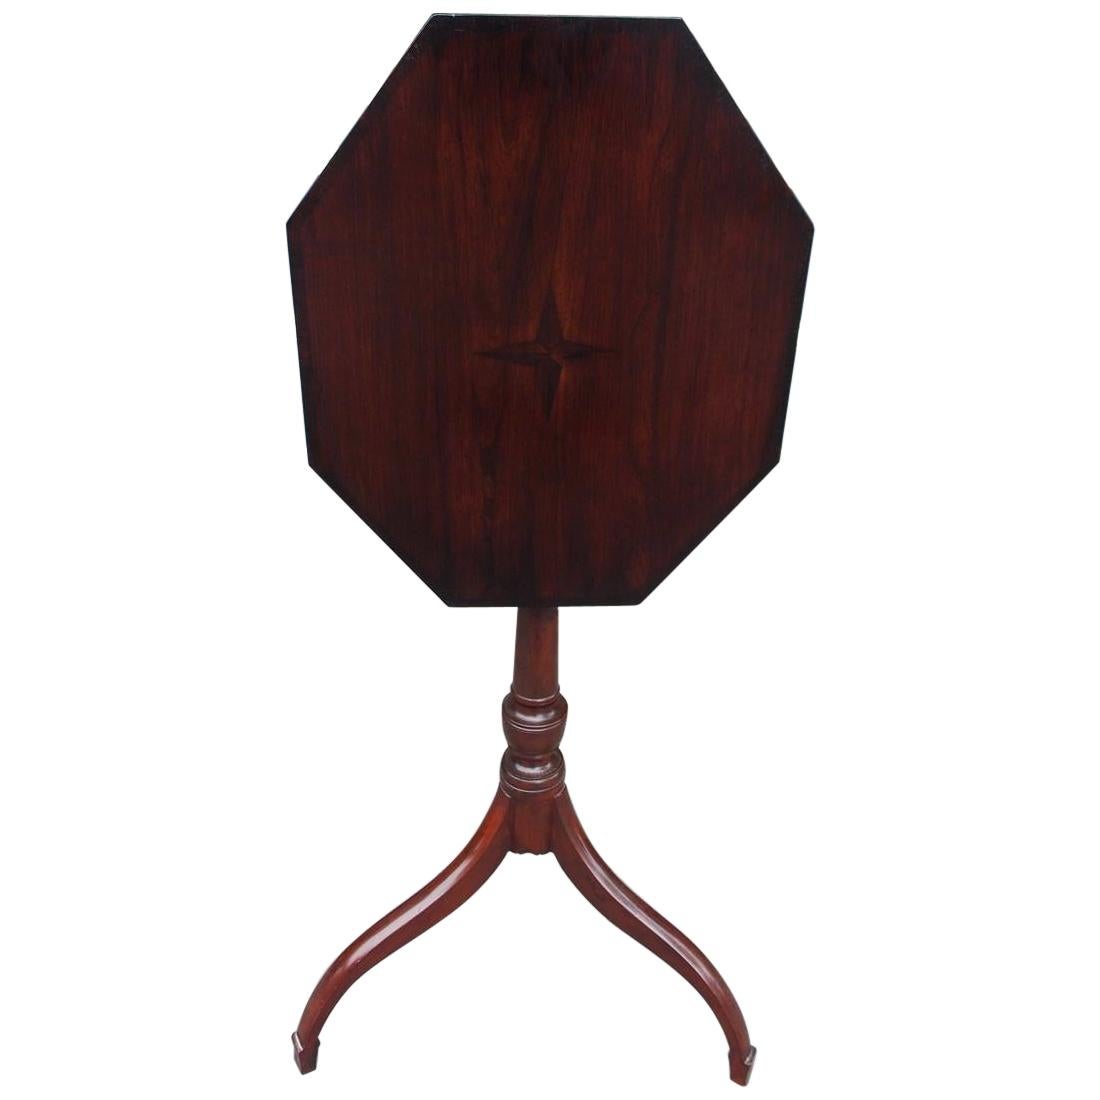  American Hepplewhite Mahogany Star Inlaid Candle Stand on Saber Legs, C. 1790